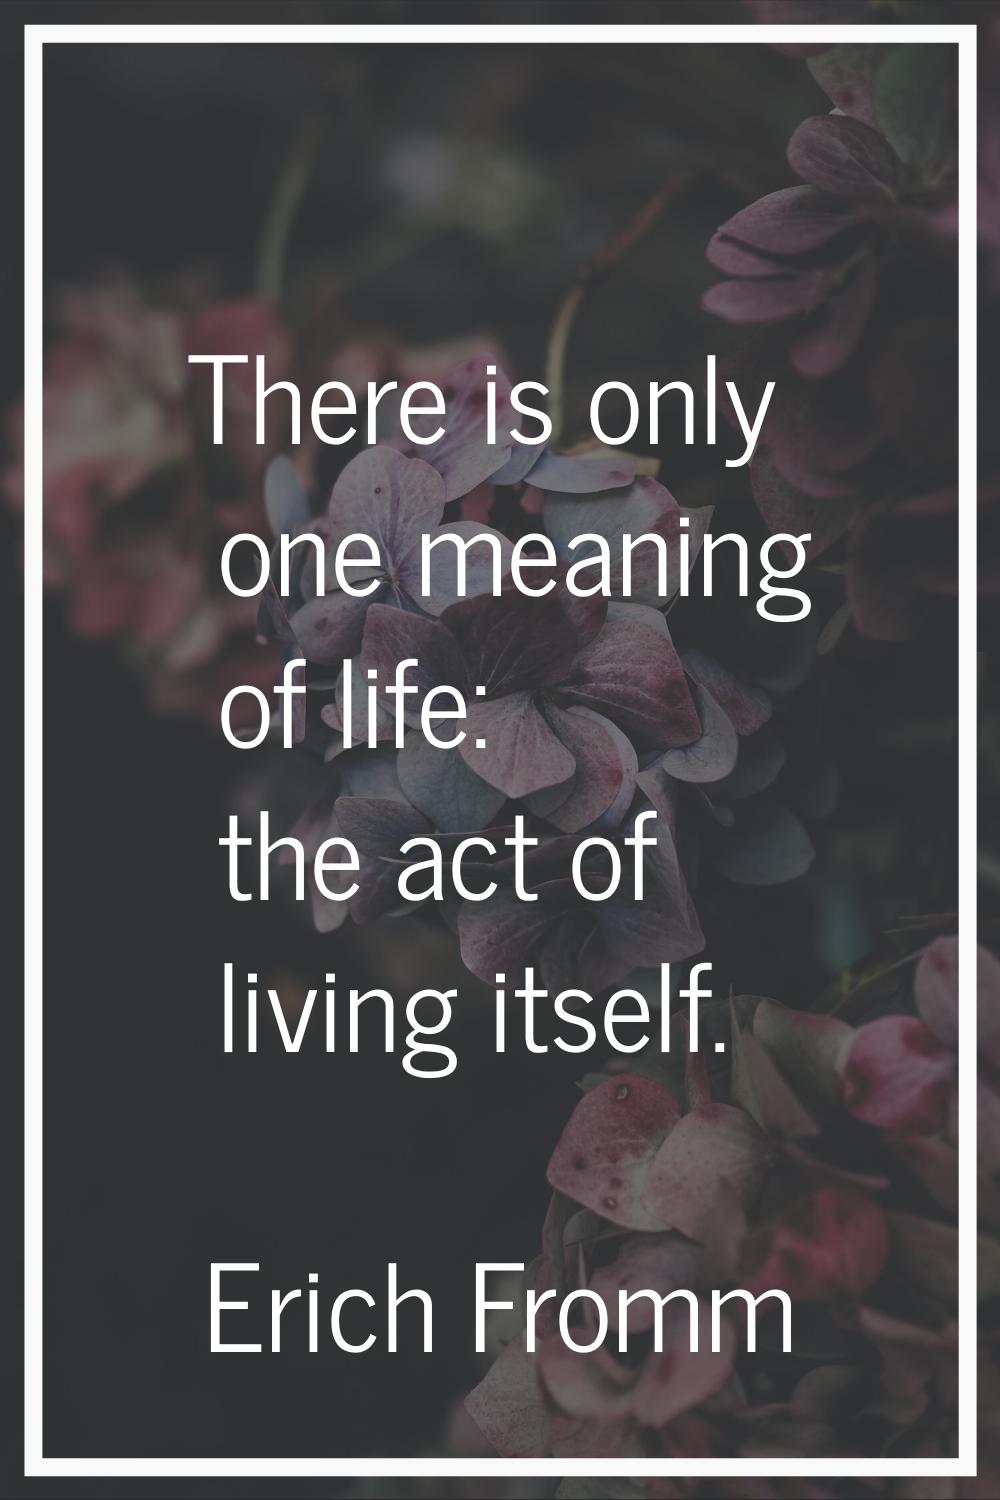 There is only one meaning of life: the act of living itself.